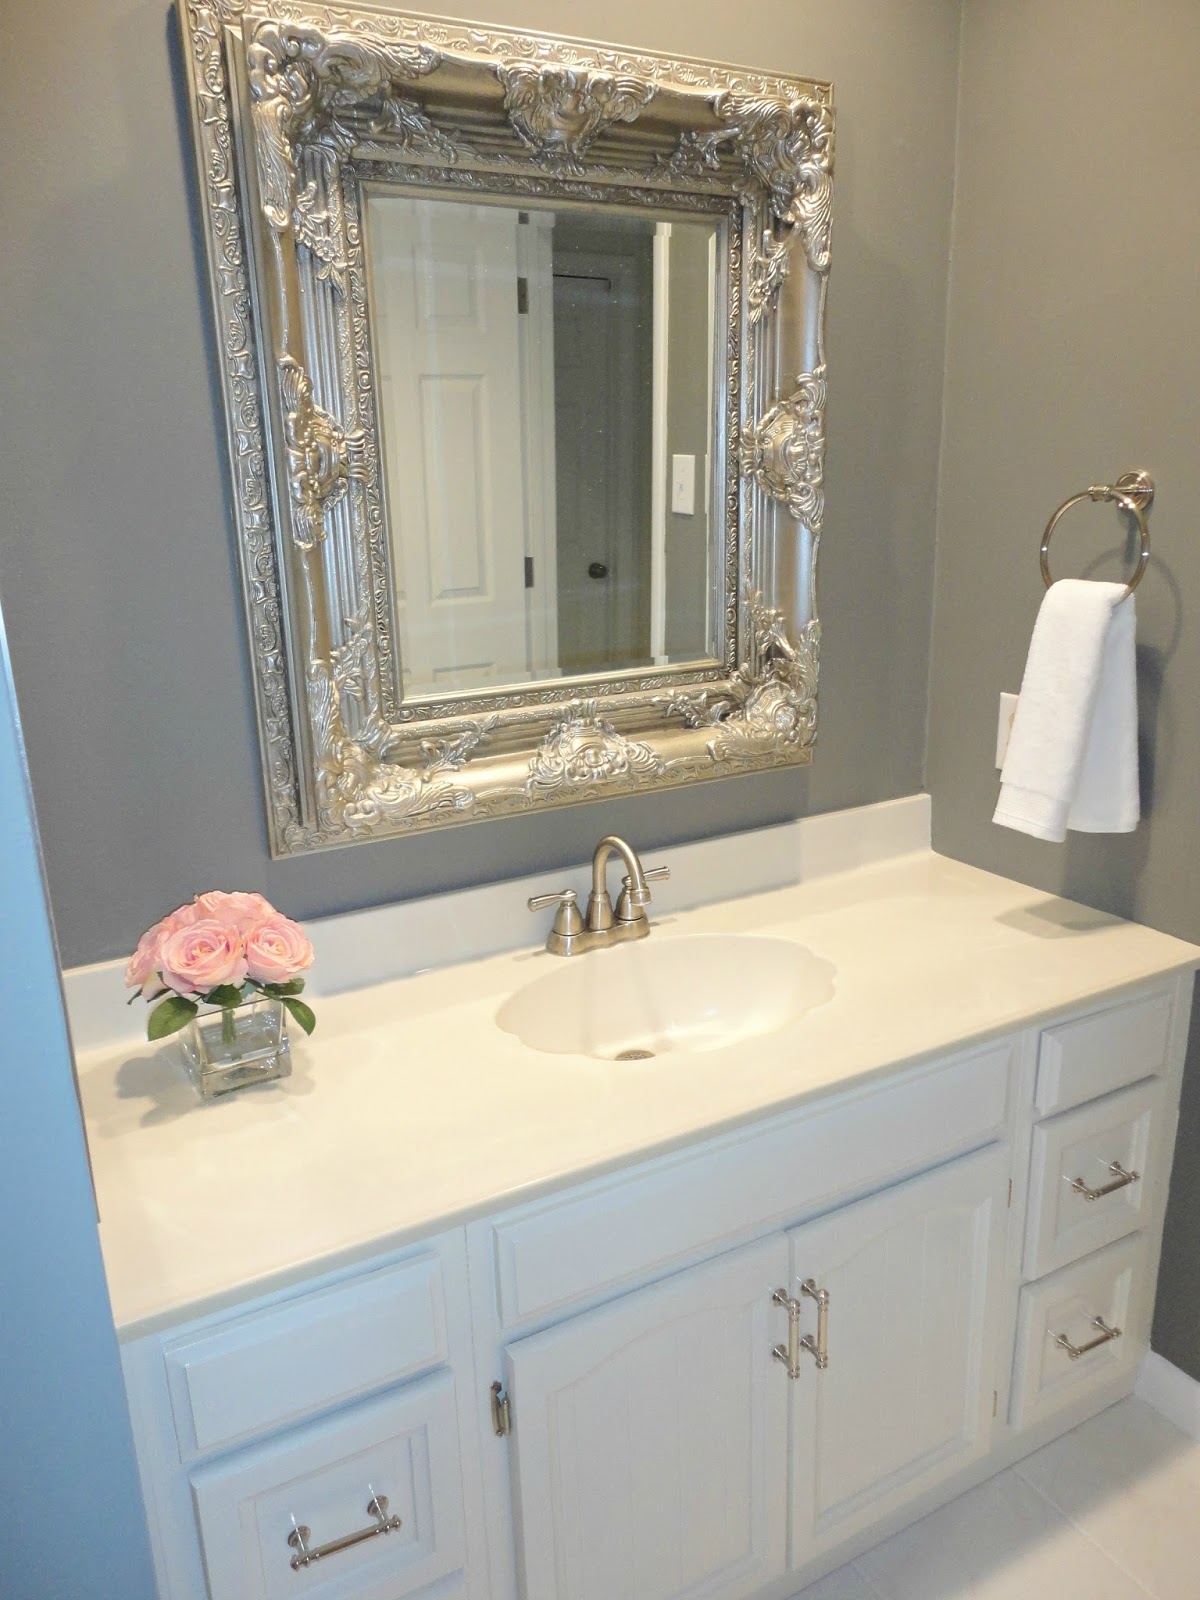 Bathroom Remodel A Bud Mesmerizing With Small Renovation